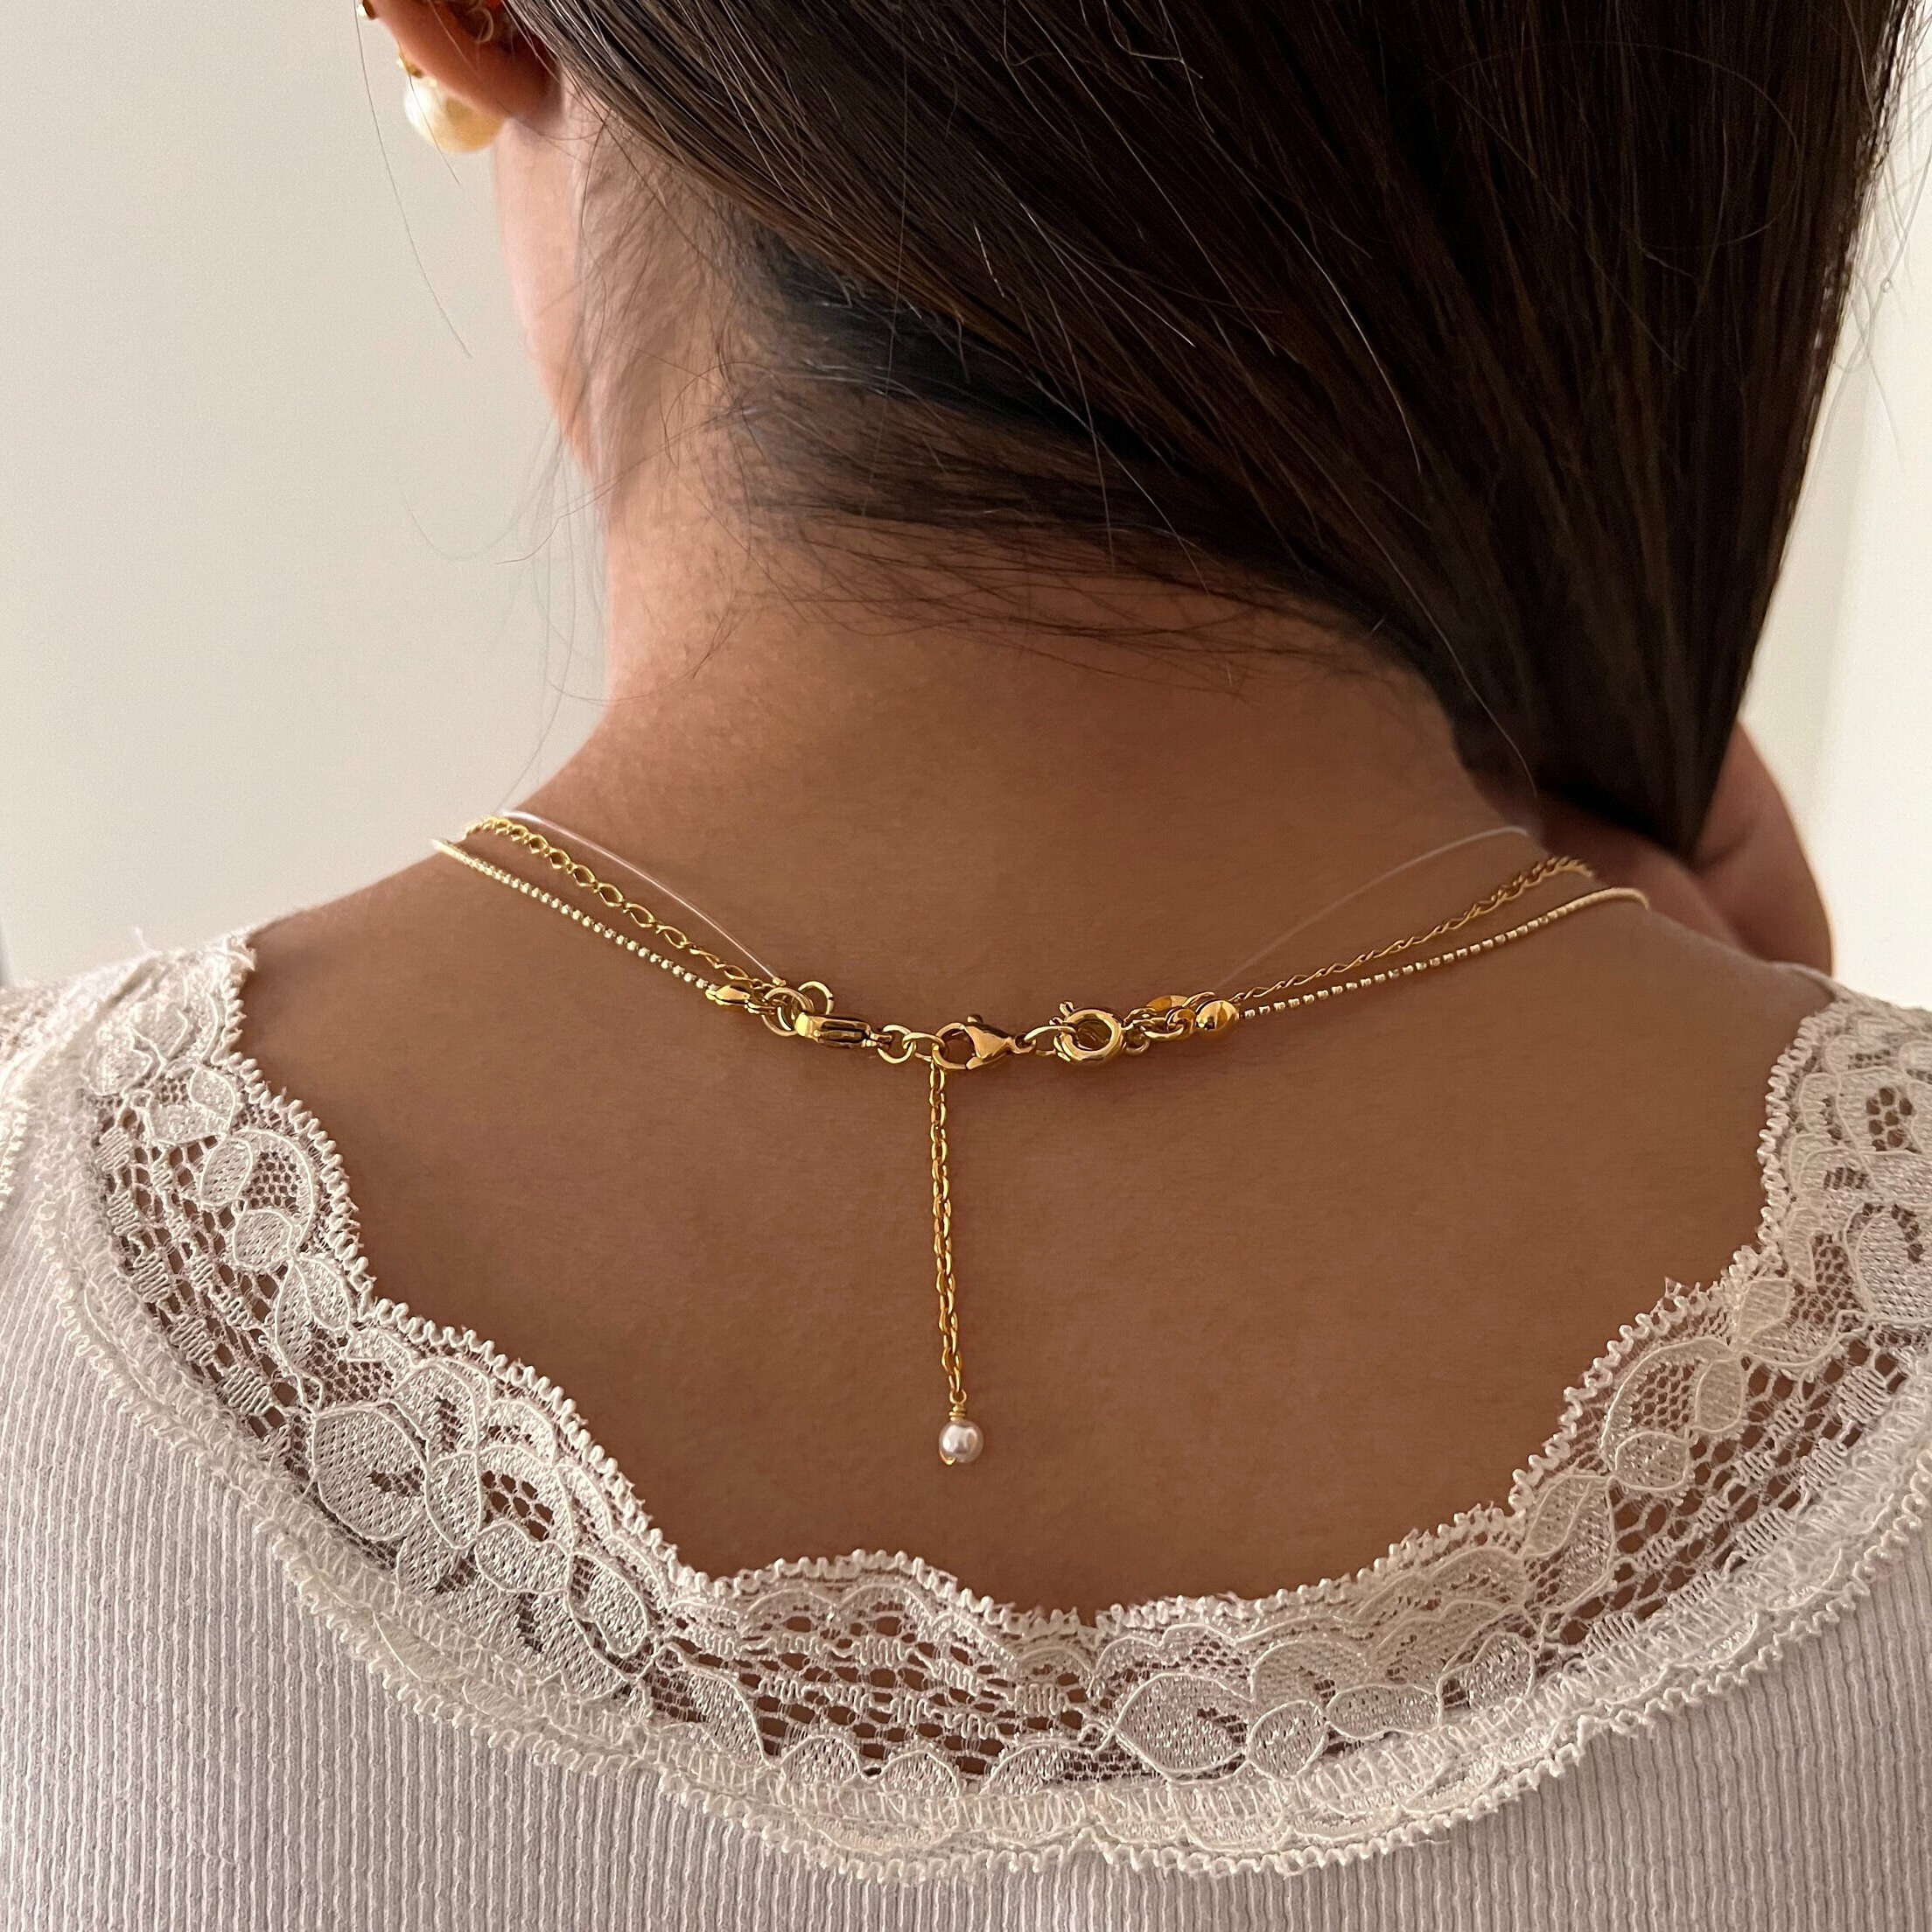 LAYERED NECKLACE SEPARATOR – Dear Henley